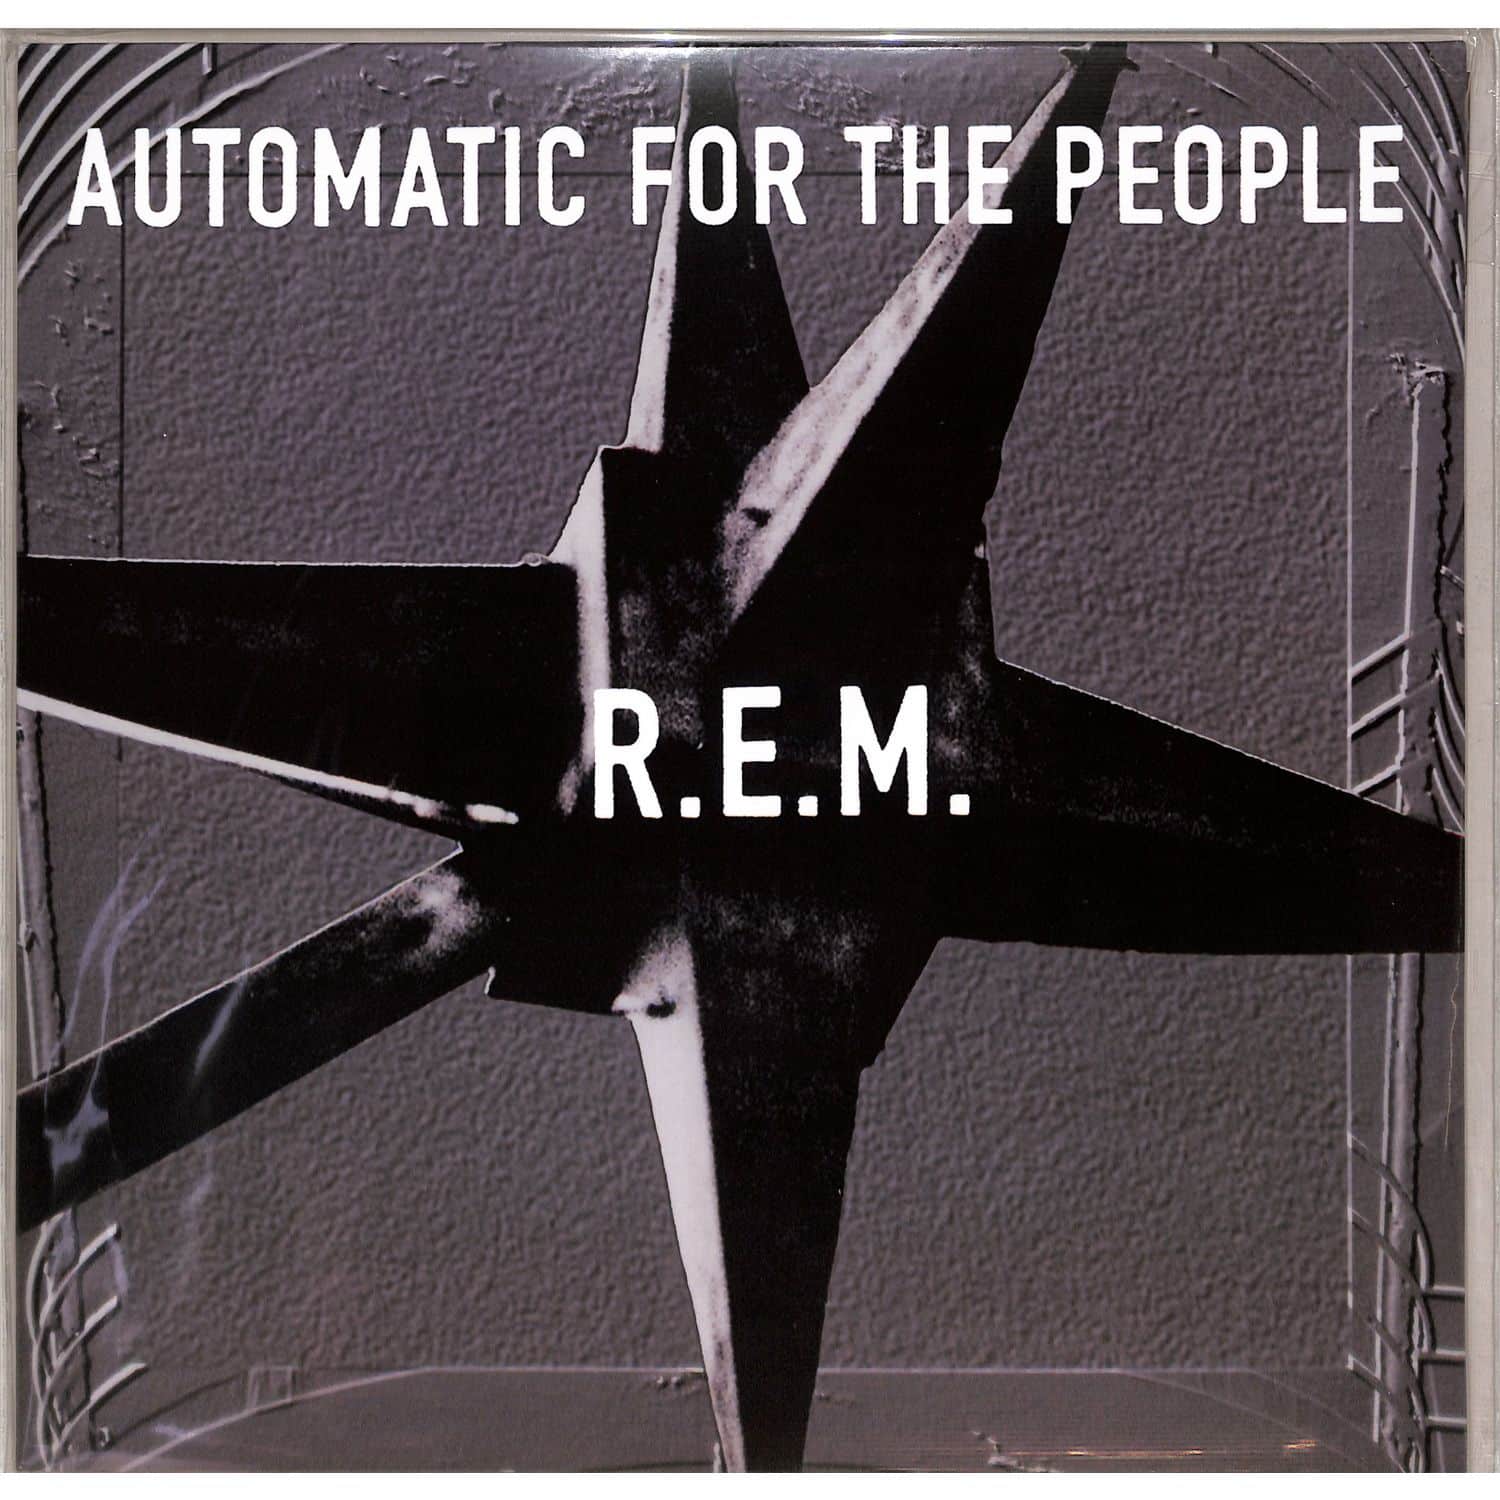 R.E.M. - AUTOMATIC FOR THE PEOPLE 